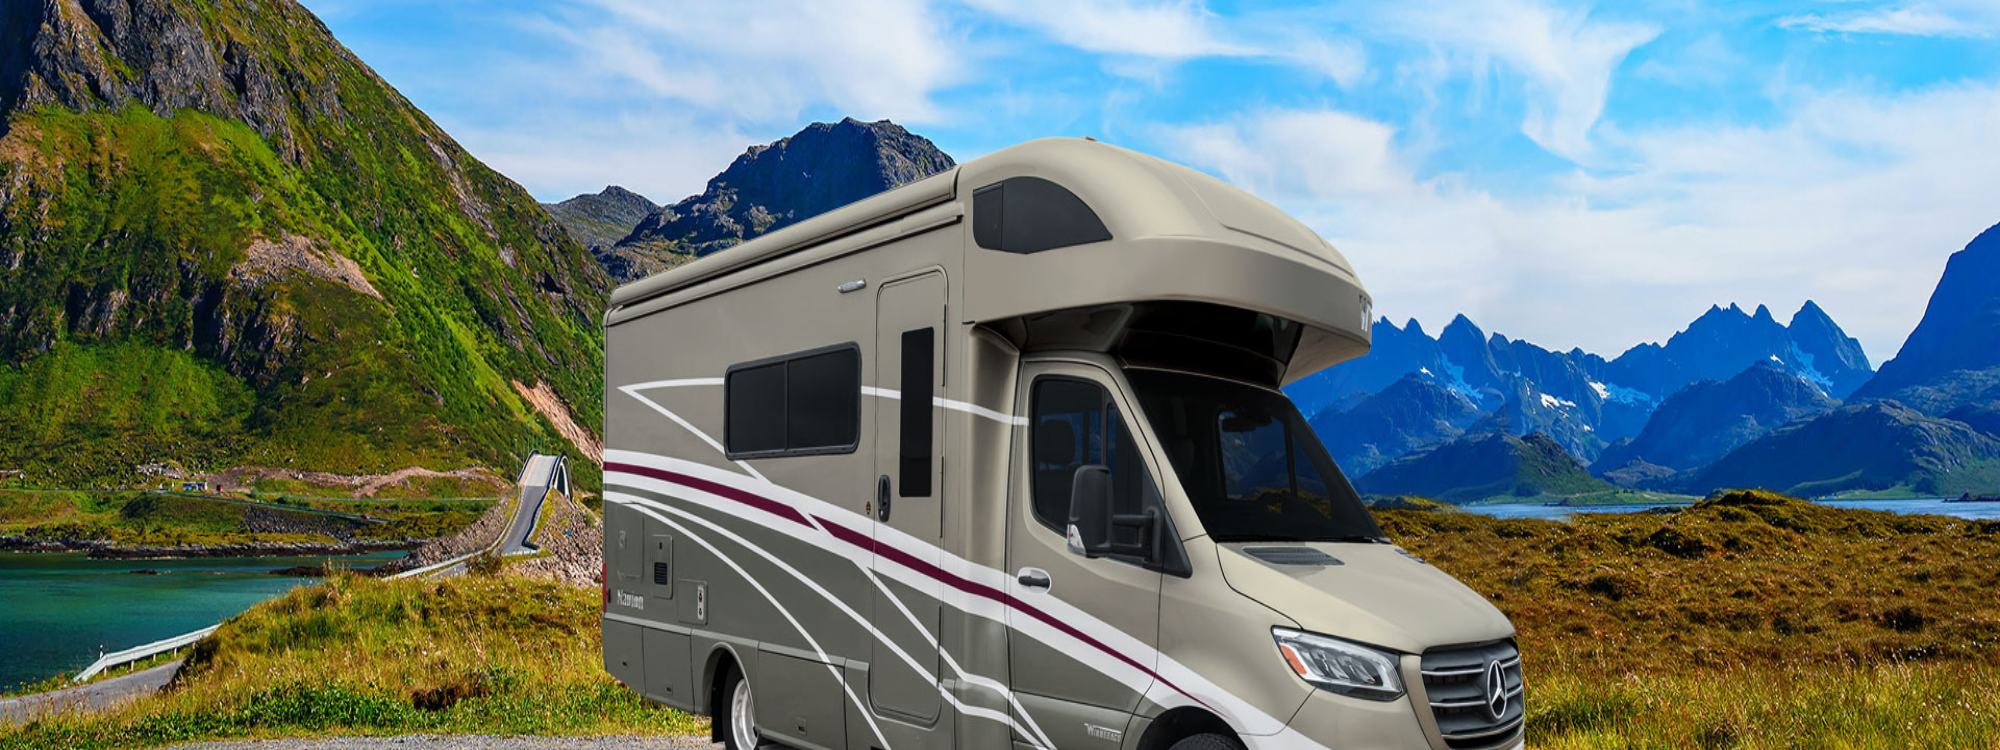 Navion motorhome parked in a scenic area